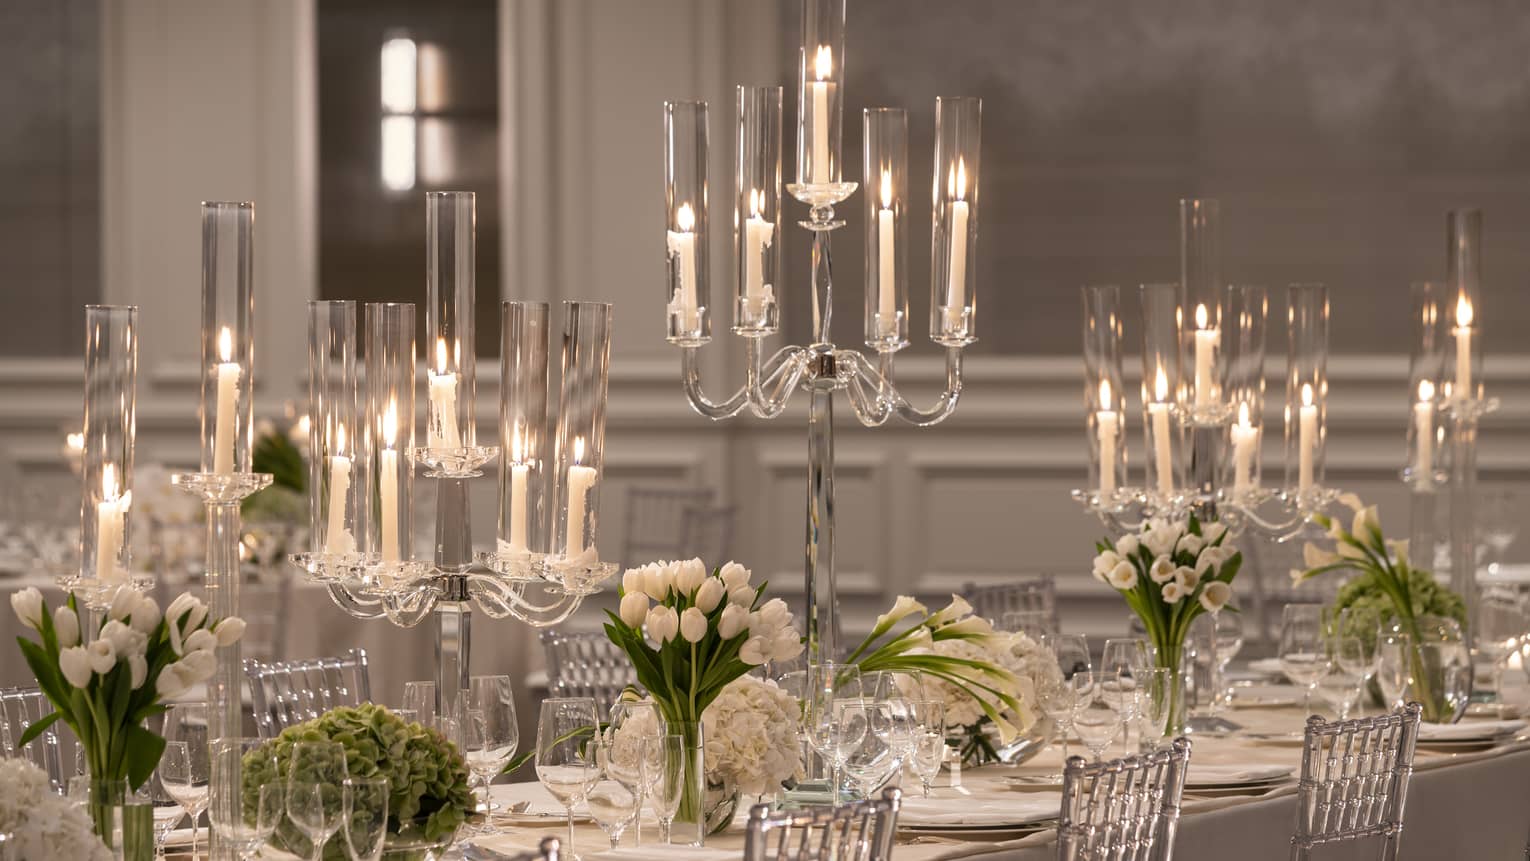 Formally set white dining table with candelabras and white flowers flanked by silver chairs